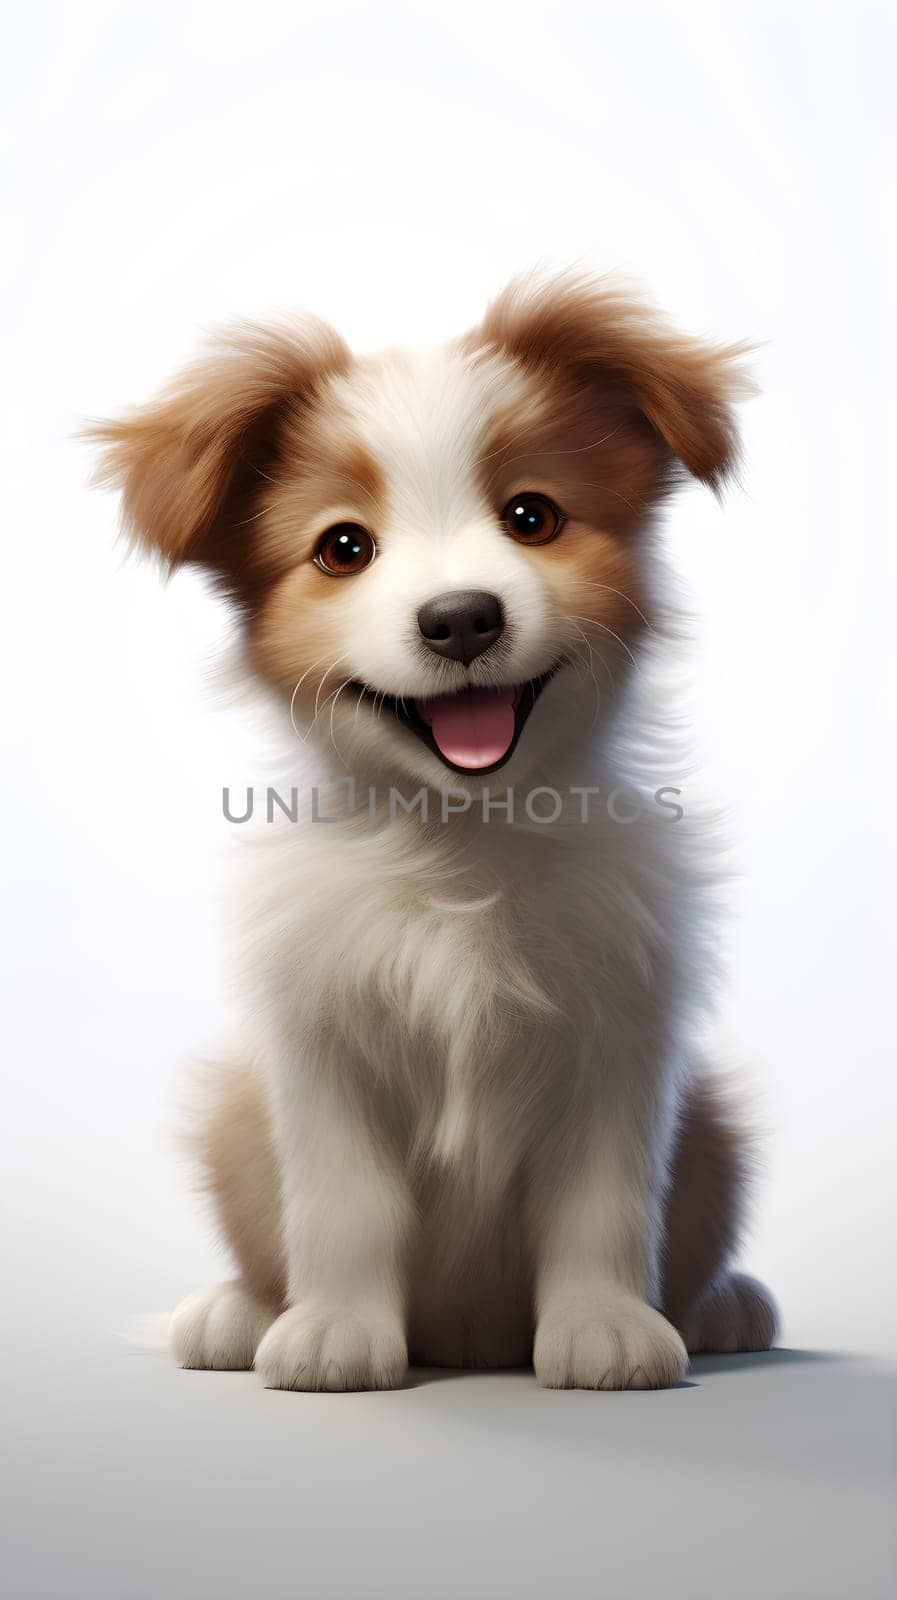 A lively puppy's, exuding pure joy and embodying the ultimate definition of man's best friend against white background by chrisroll